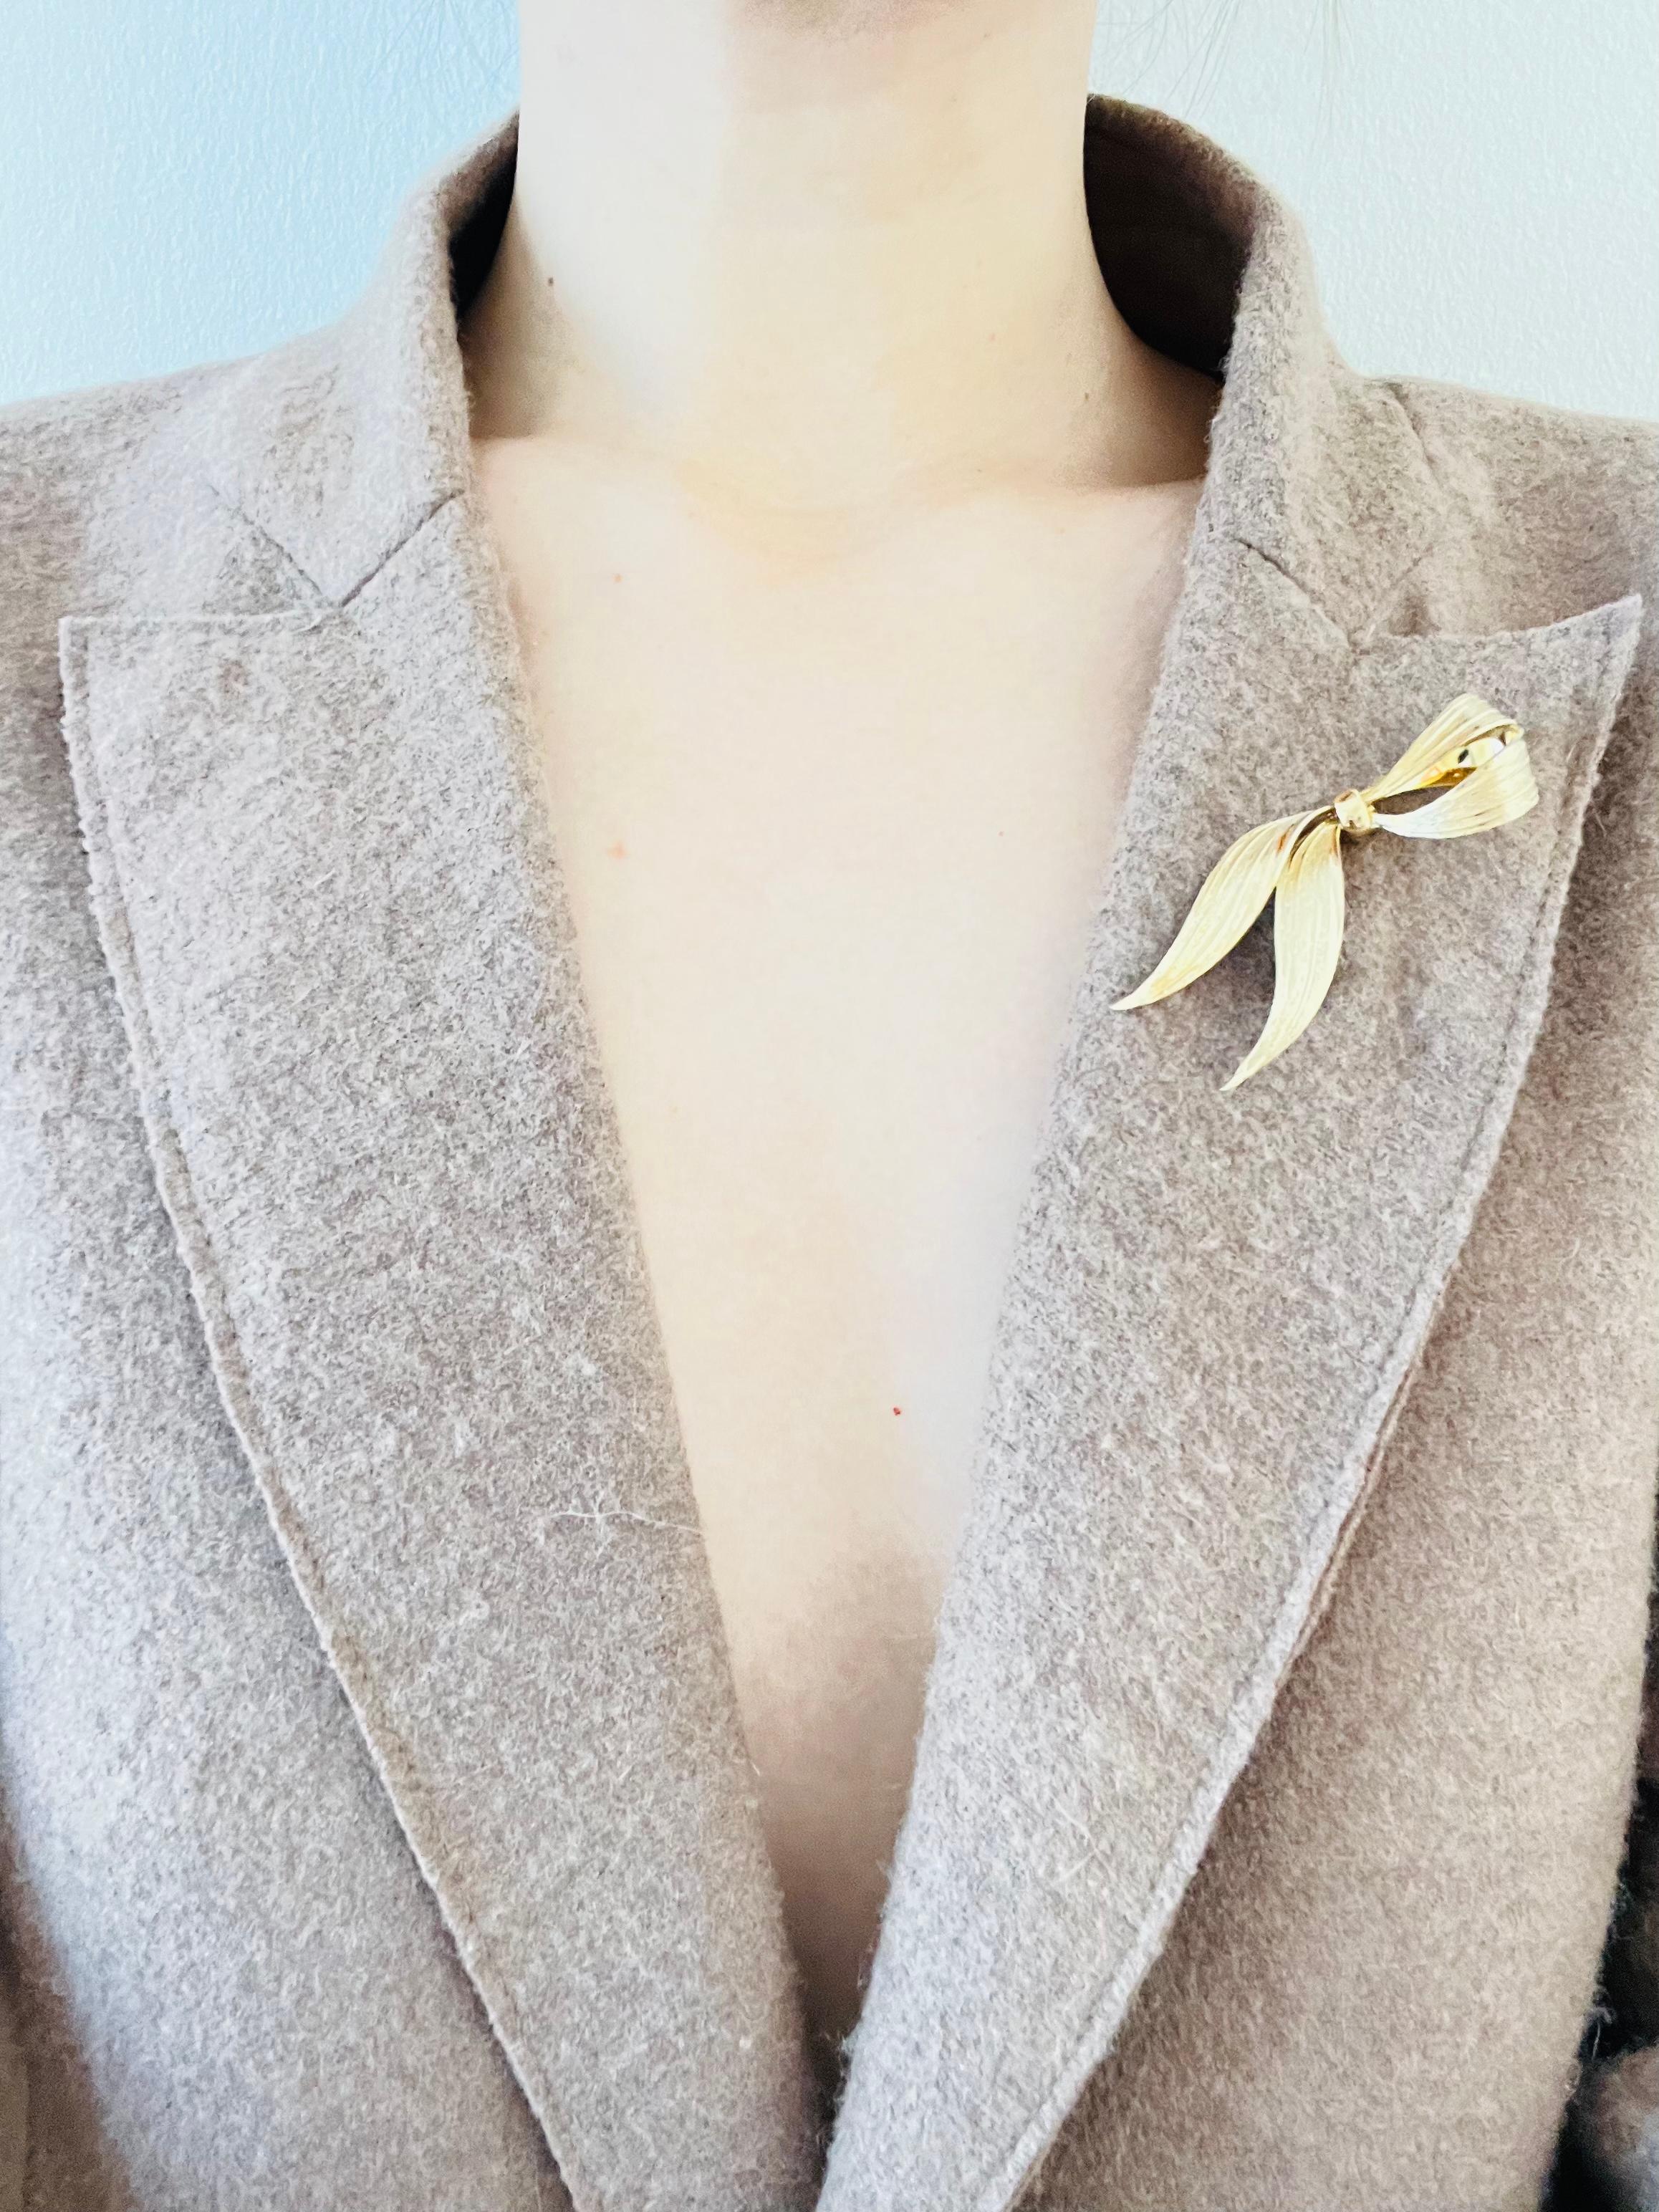 Christian Dior GROSSE 1964 Vintage Double Wavy Long Knot Bow Ribbon Gold Brooch In Good Condition For Sale In Wokingham, England